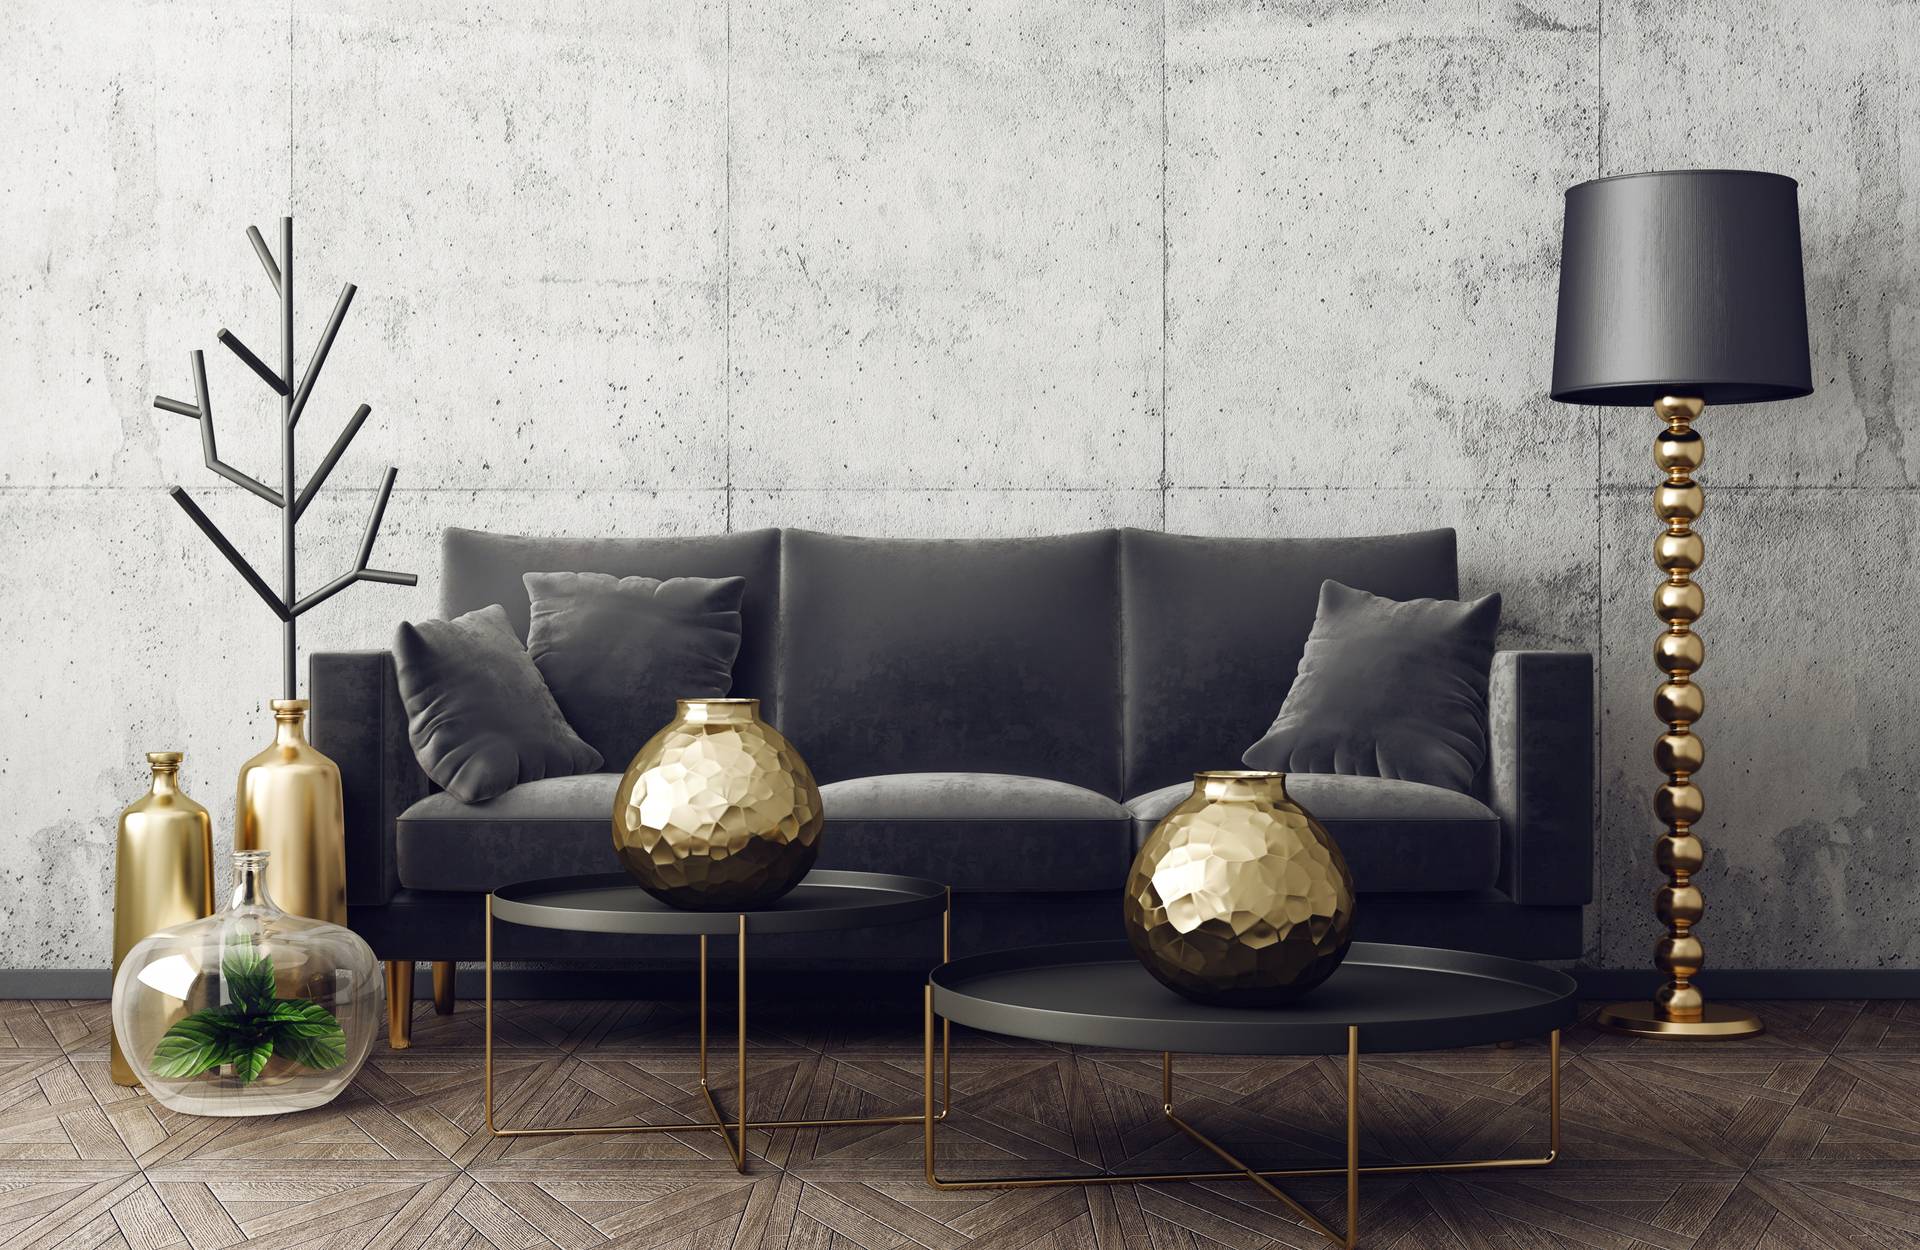 Charcoal 3-seater sofa surrounded by gold decorations